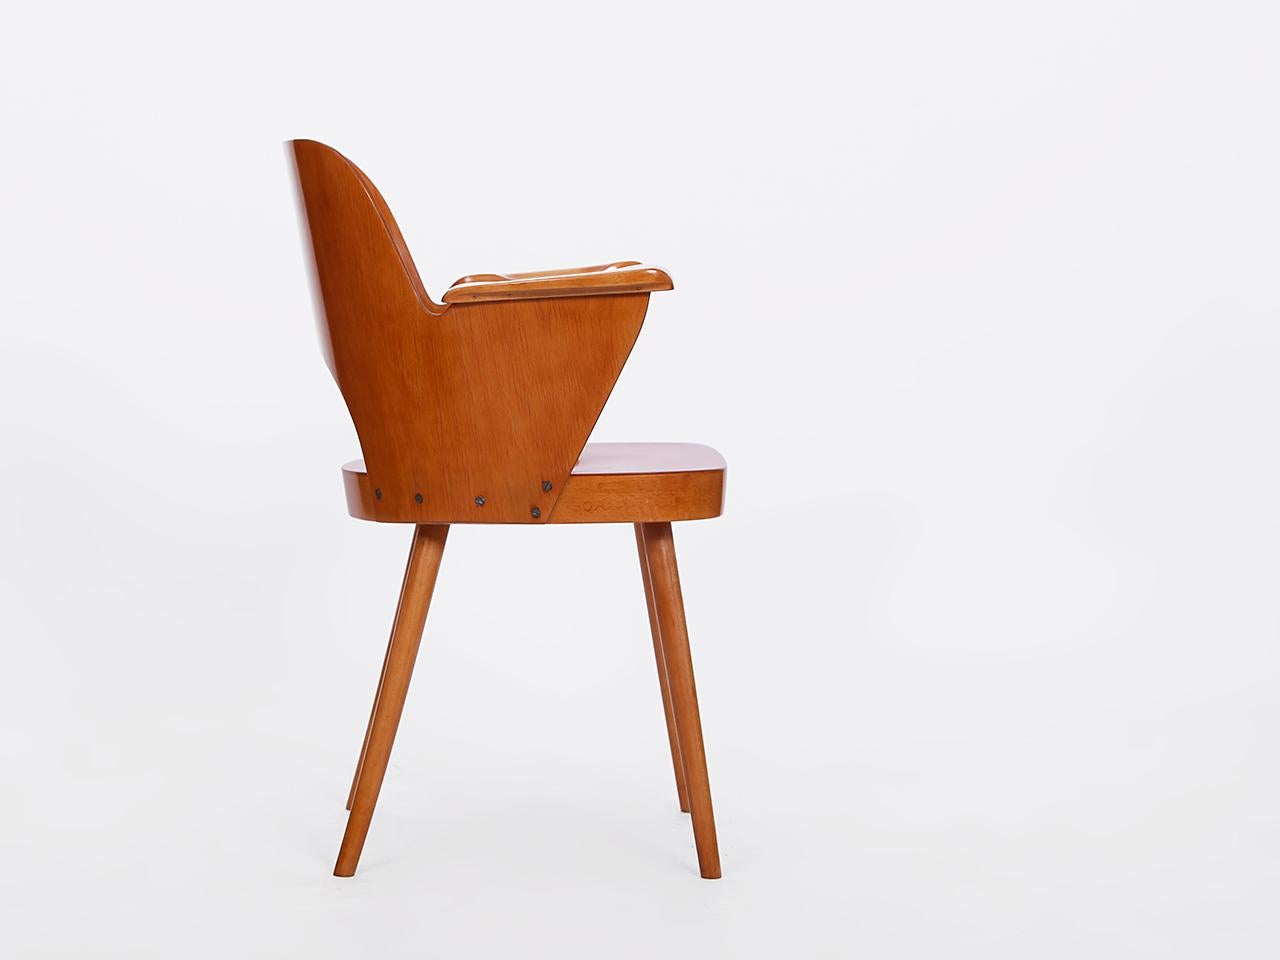 This chair, designed by Oswald Haerdtl, was manufactured by the successor company of Thonet, Narodni Podnik Ton in Bystrice pod Hostynem, Czech Republic in 1955.
Seat and backrest made of plywood. The chair have been completely restored.

